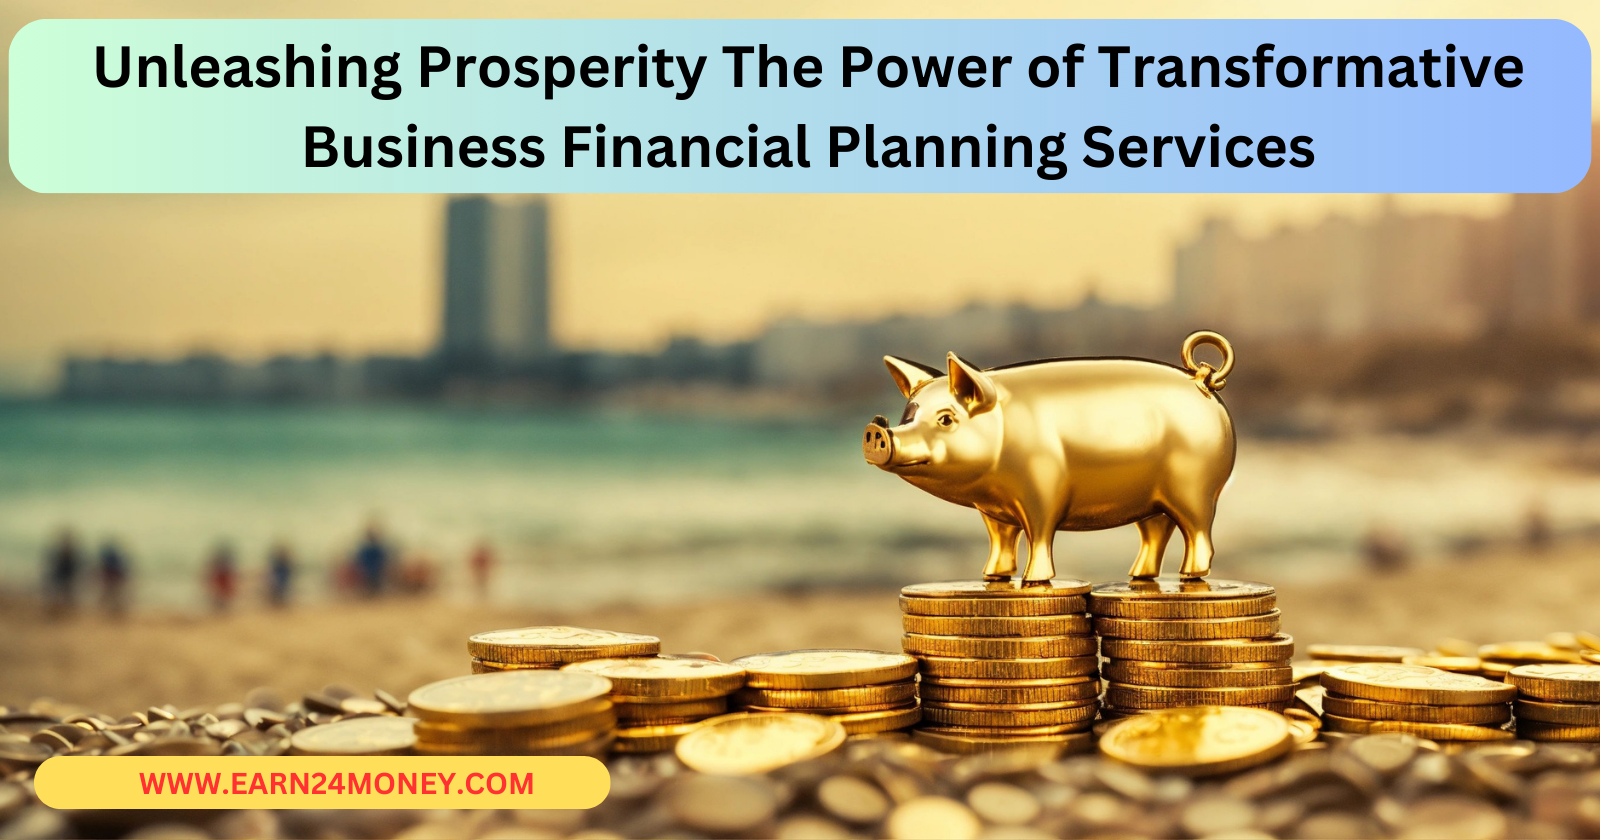 Unleashing Prosperity The Power of Transformative Business Financial Planning Services